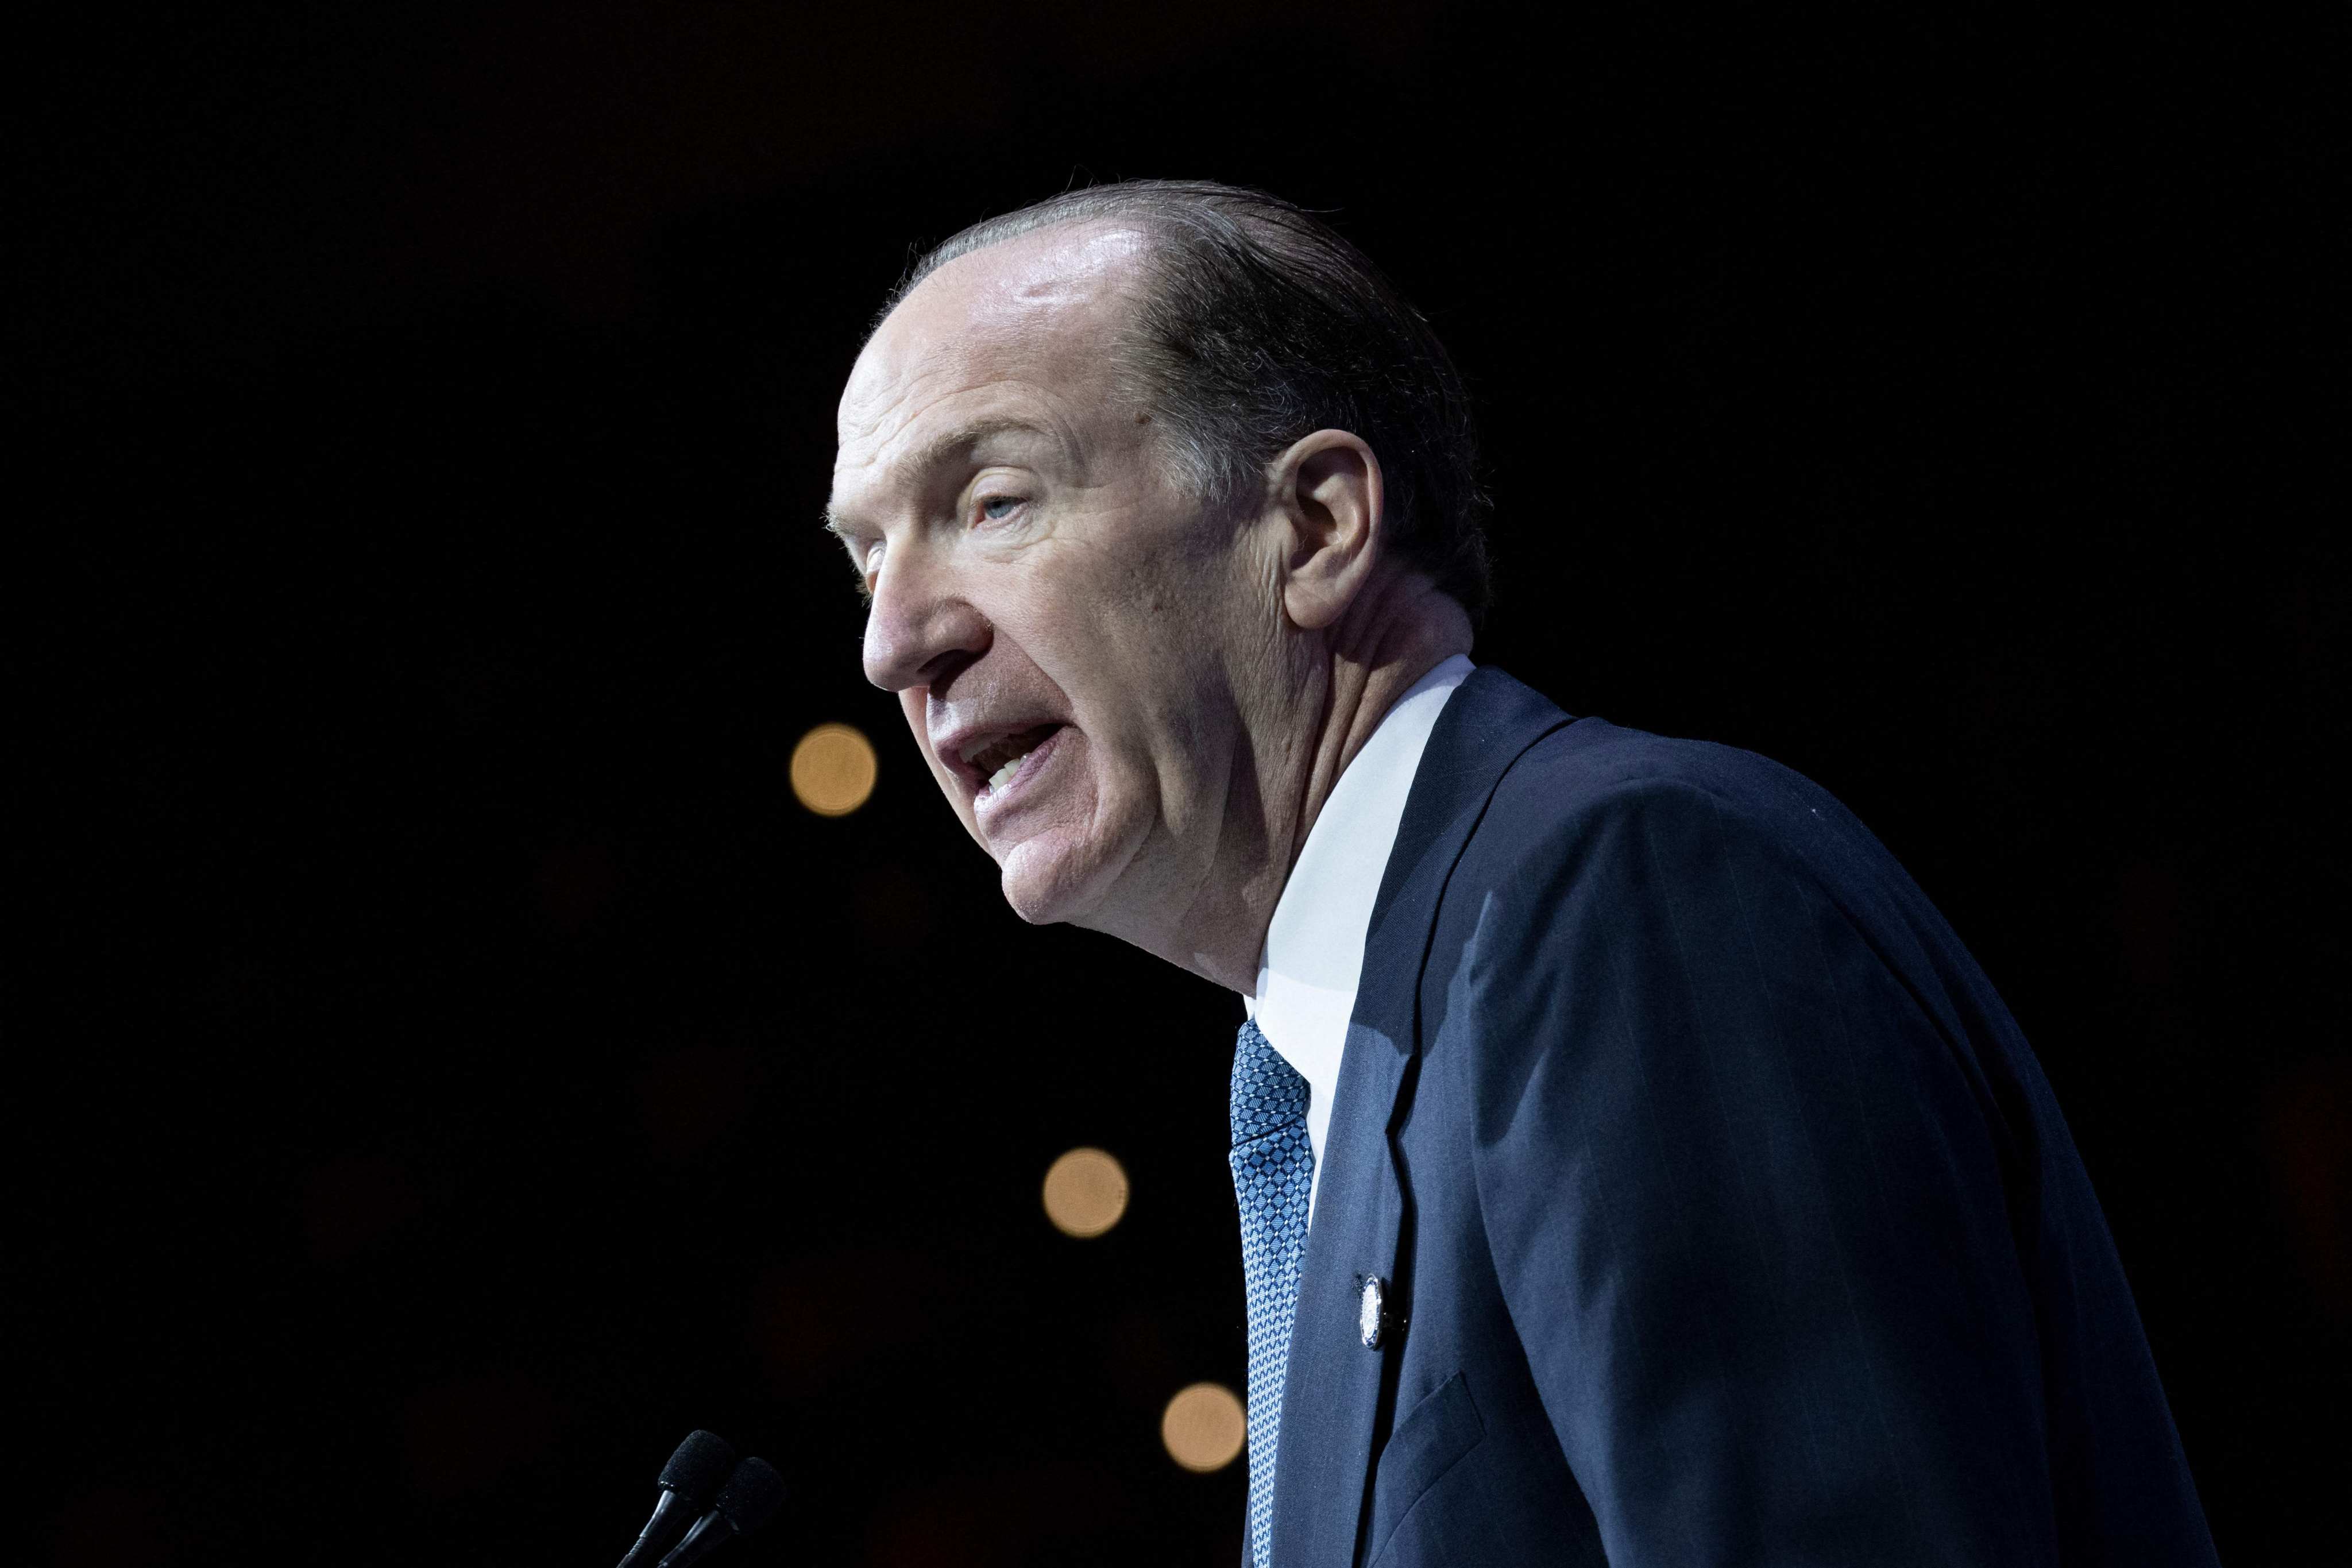 World Bank Group President David Malpass speaks during the annual meetings plenary of the IMF and the World Bank Group annual meeting at the IMF headquarters in Washington, DC. - World Bank chief David Malpass announced February 15, 2023 he would step down by the end of June from his position heading the development lender. Photo: AFP